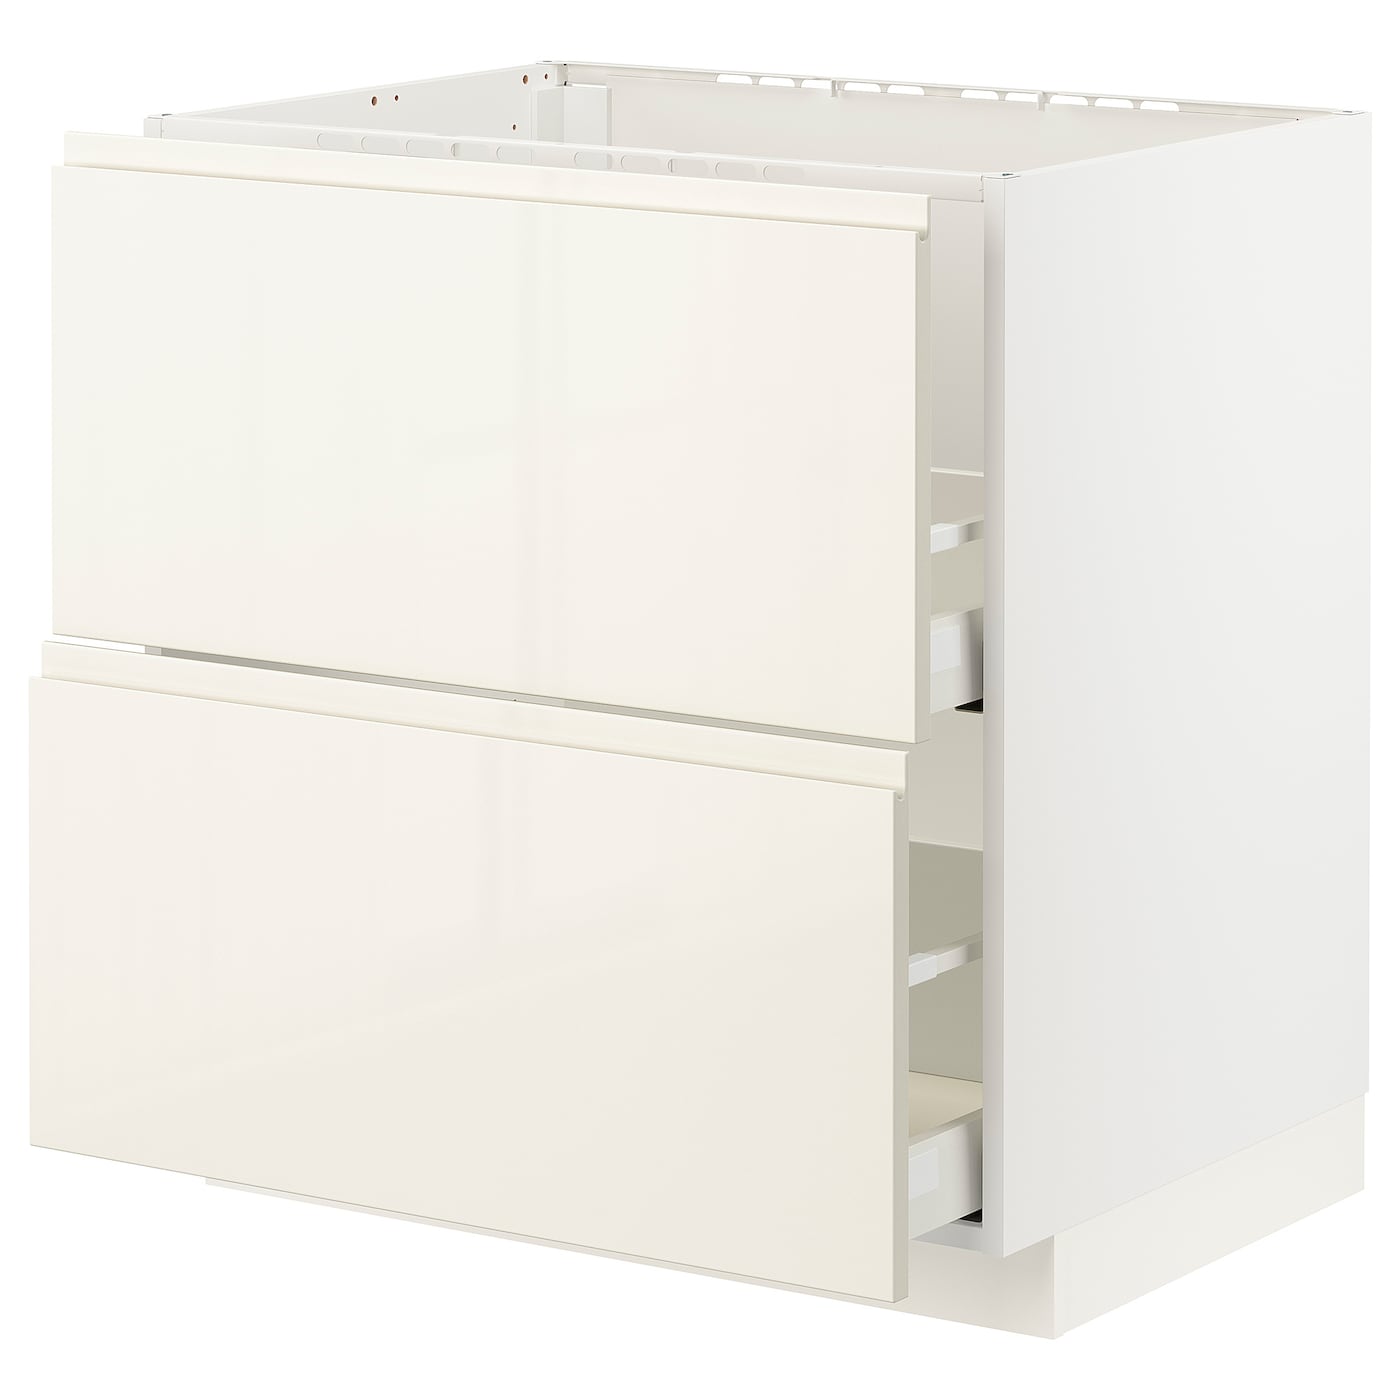 METOD / MAXIMERA base cab f sink+2 fronts/2 drawers white/Voxtorp 